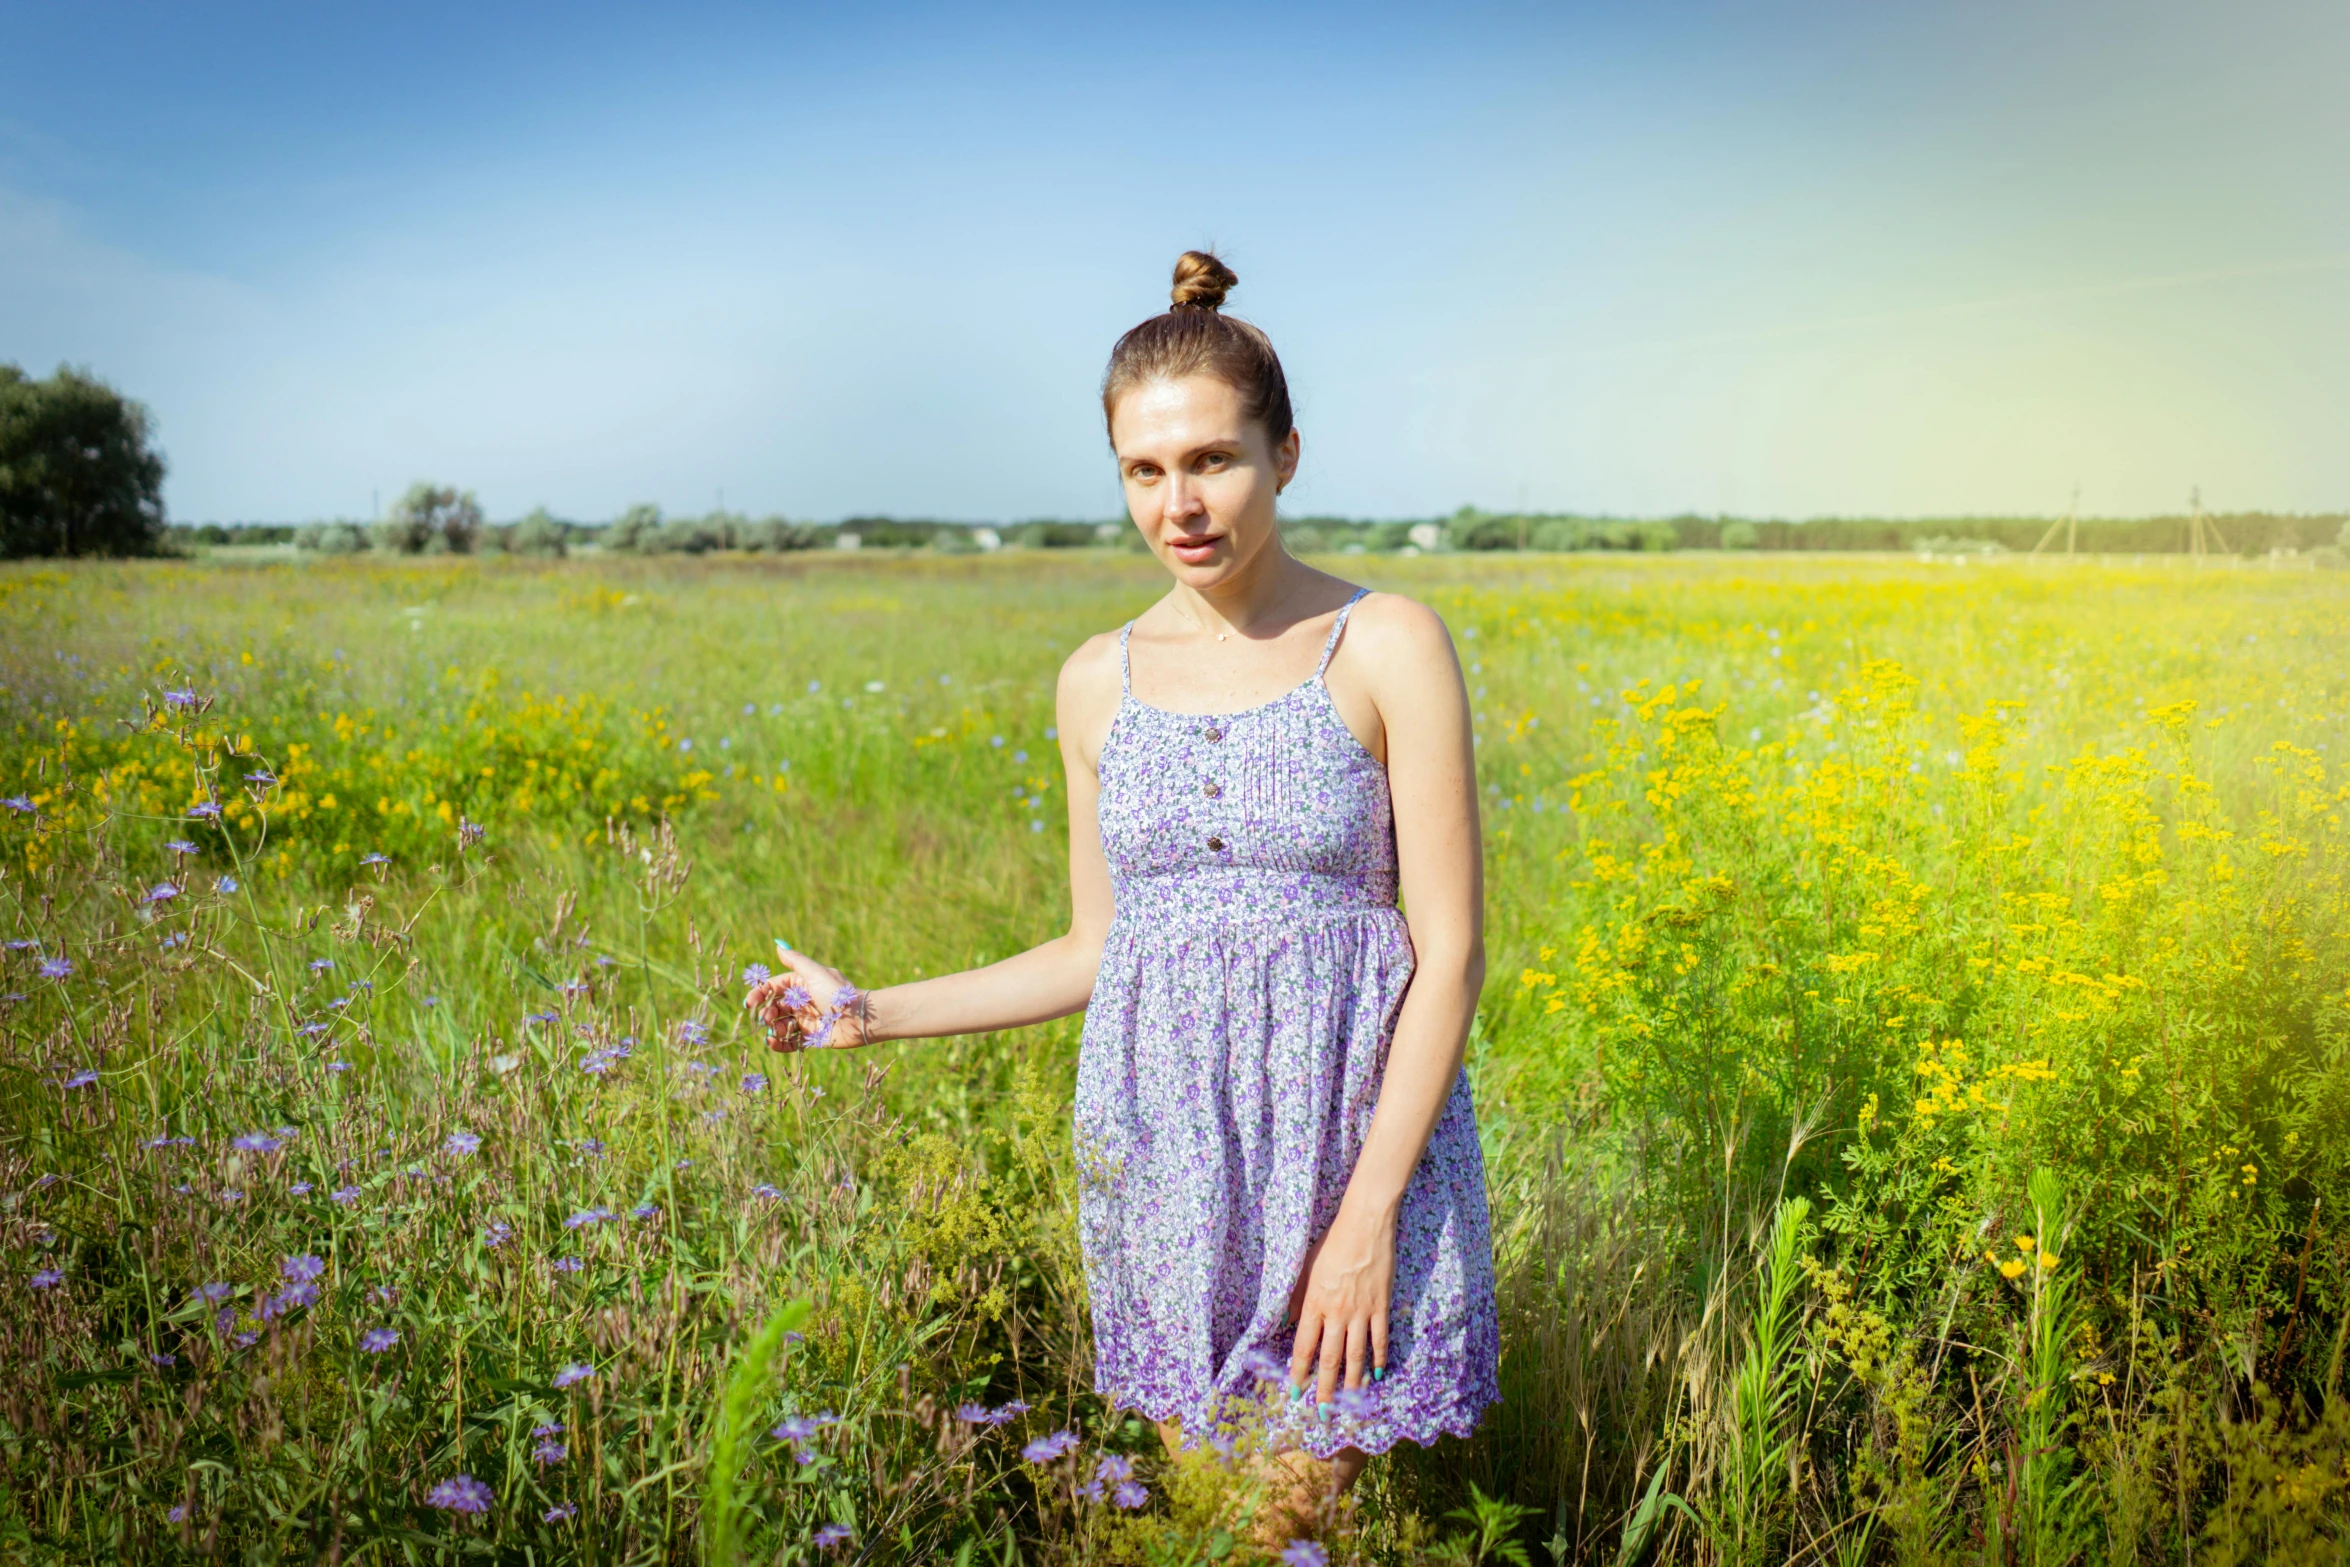 a young woman standing in tall grass near flowers